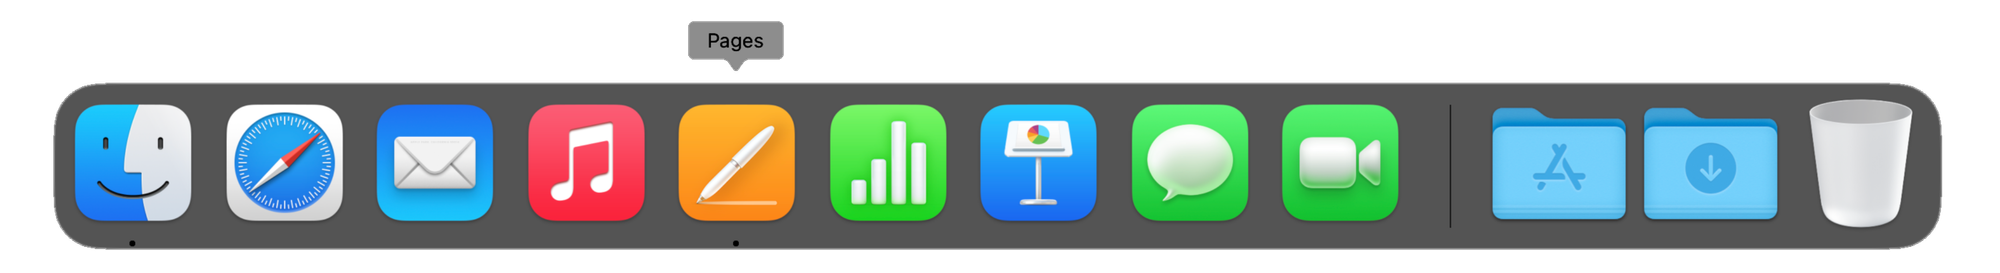 The Dock and active applications shown with a black dot.